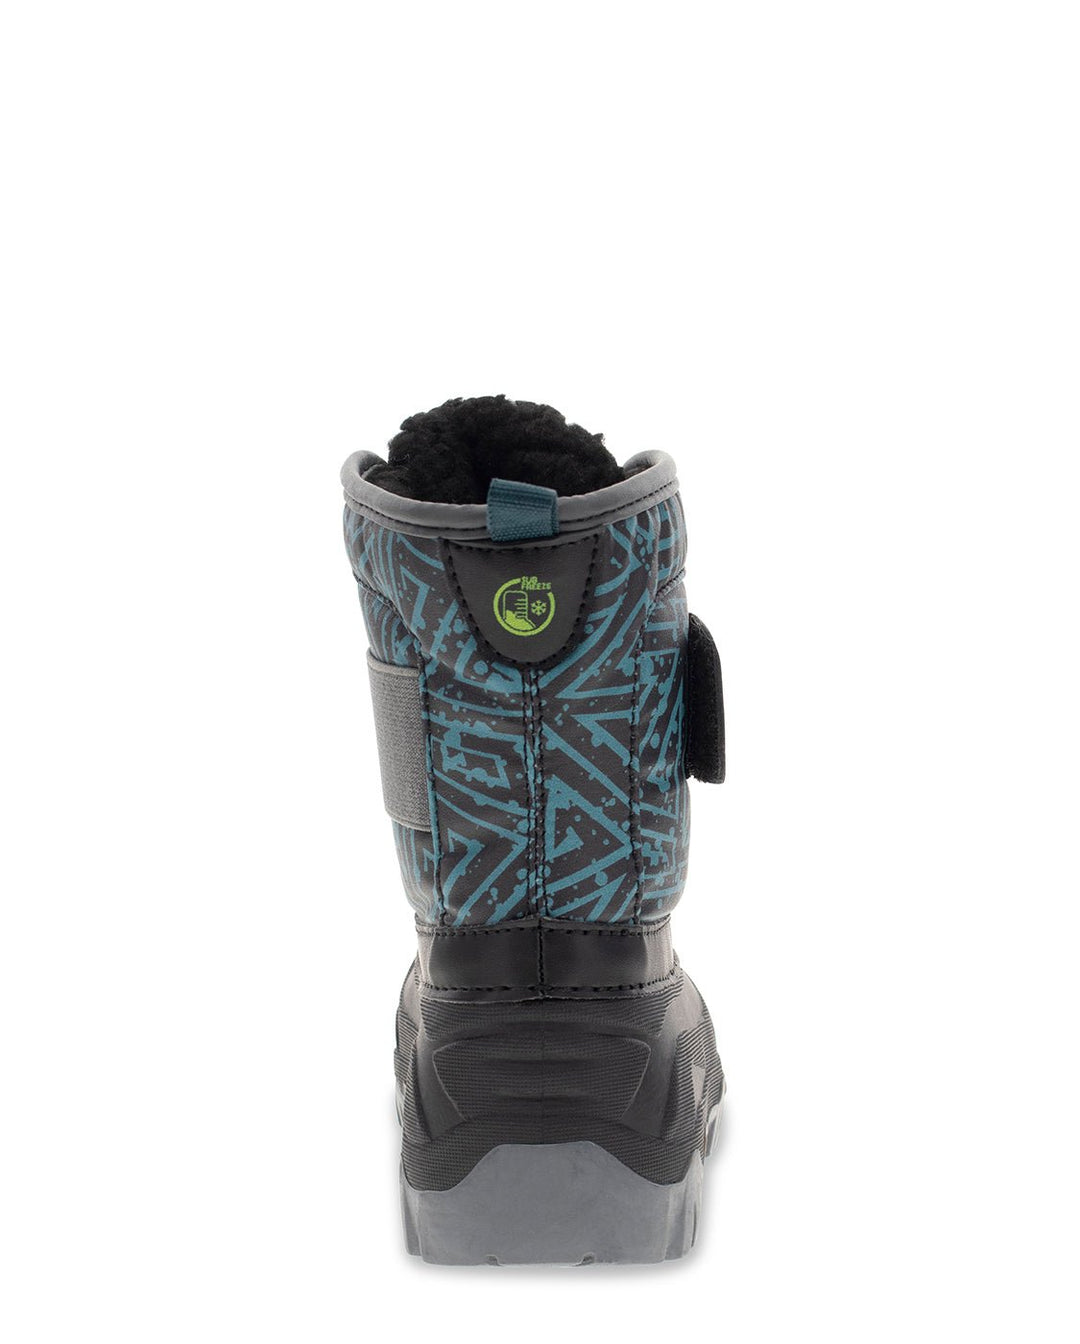 Kids Baker Cold Weather Boot - Teal - Western Chief